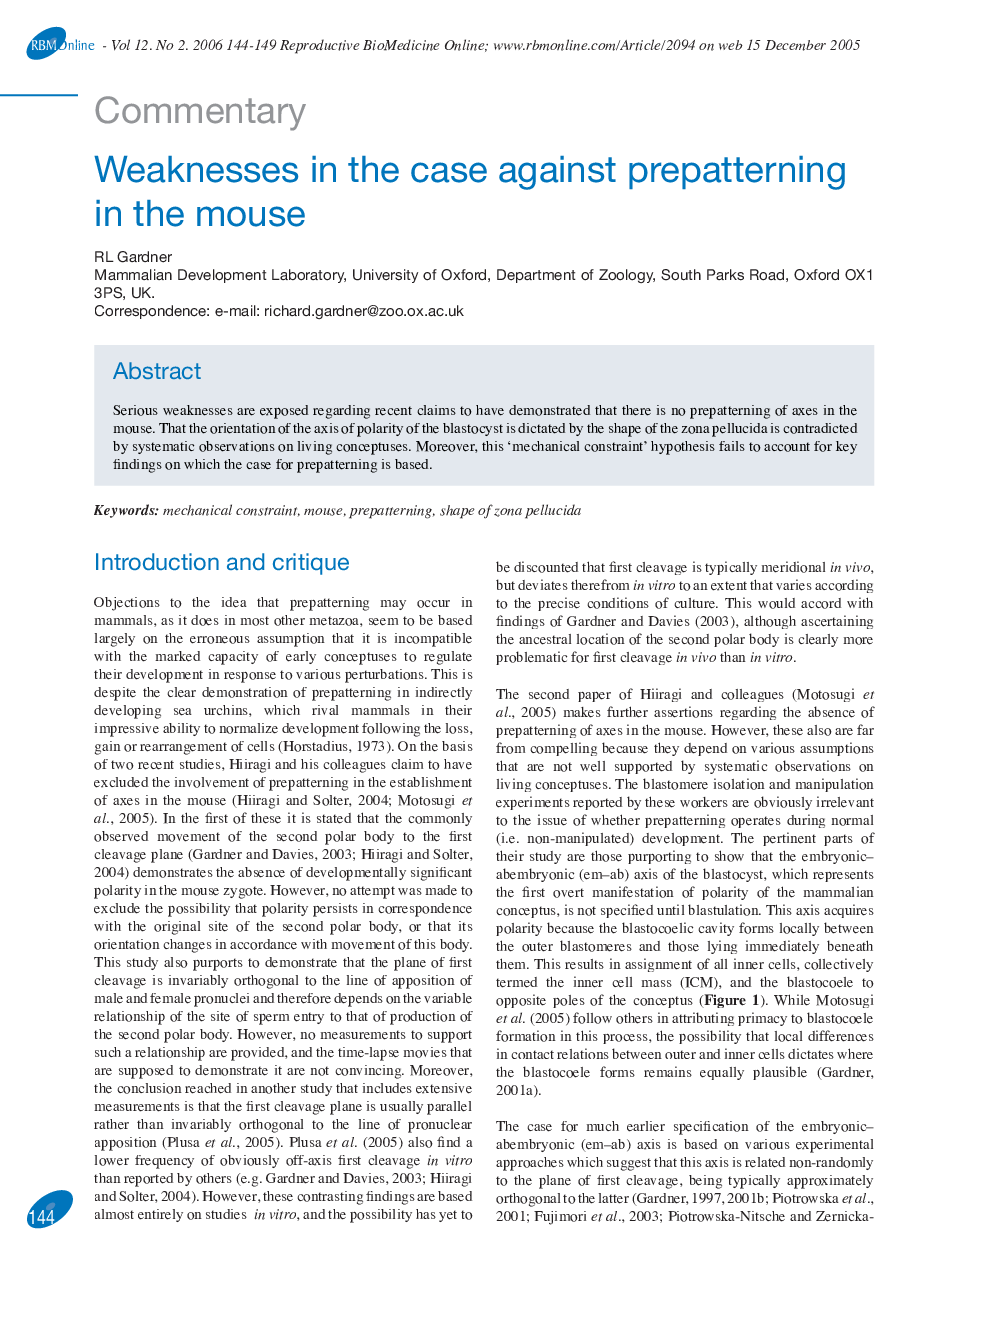 Weaknesses in the case against prepatterning in the mouse